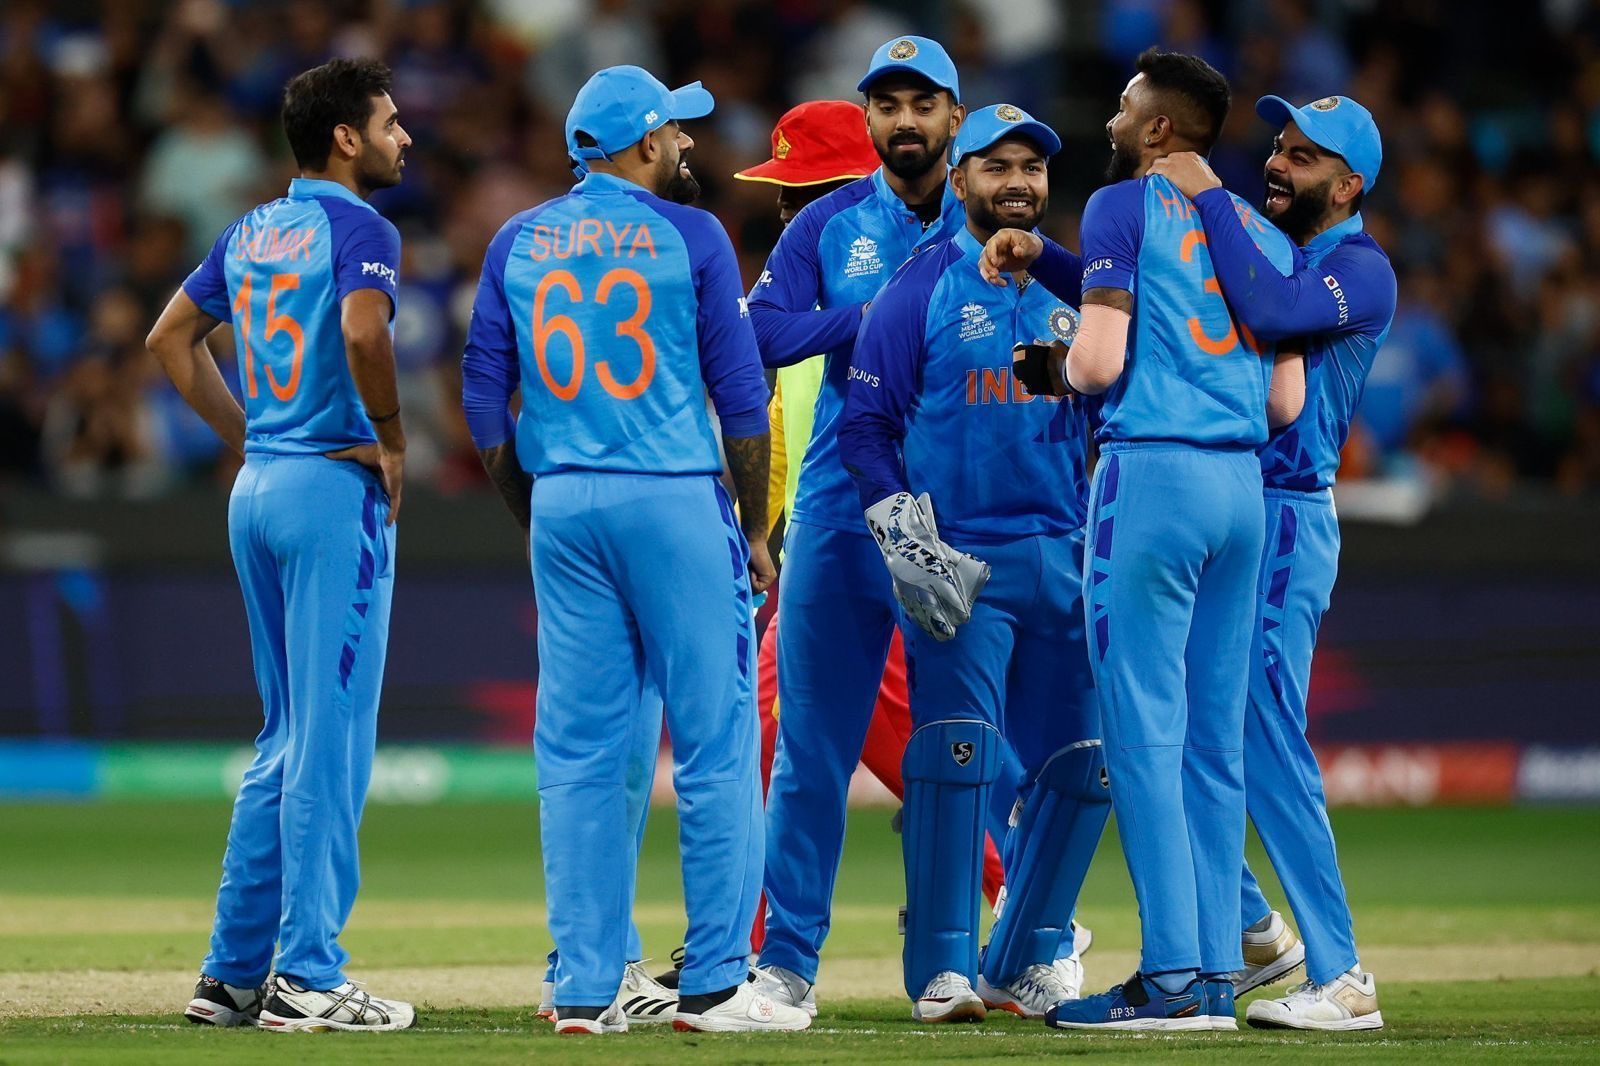 Team India will square off against England in the 2nd semi-final in a few moments. 